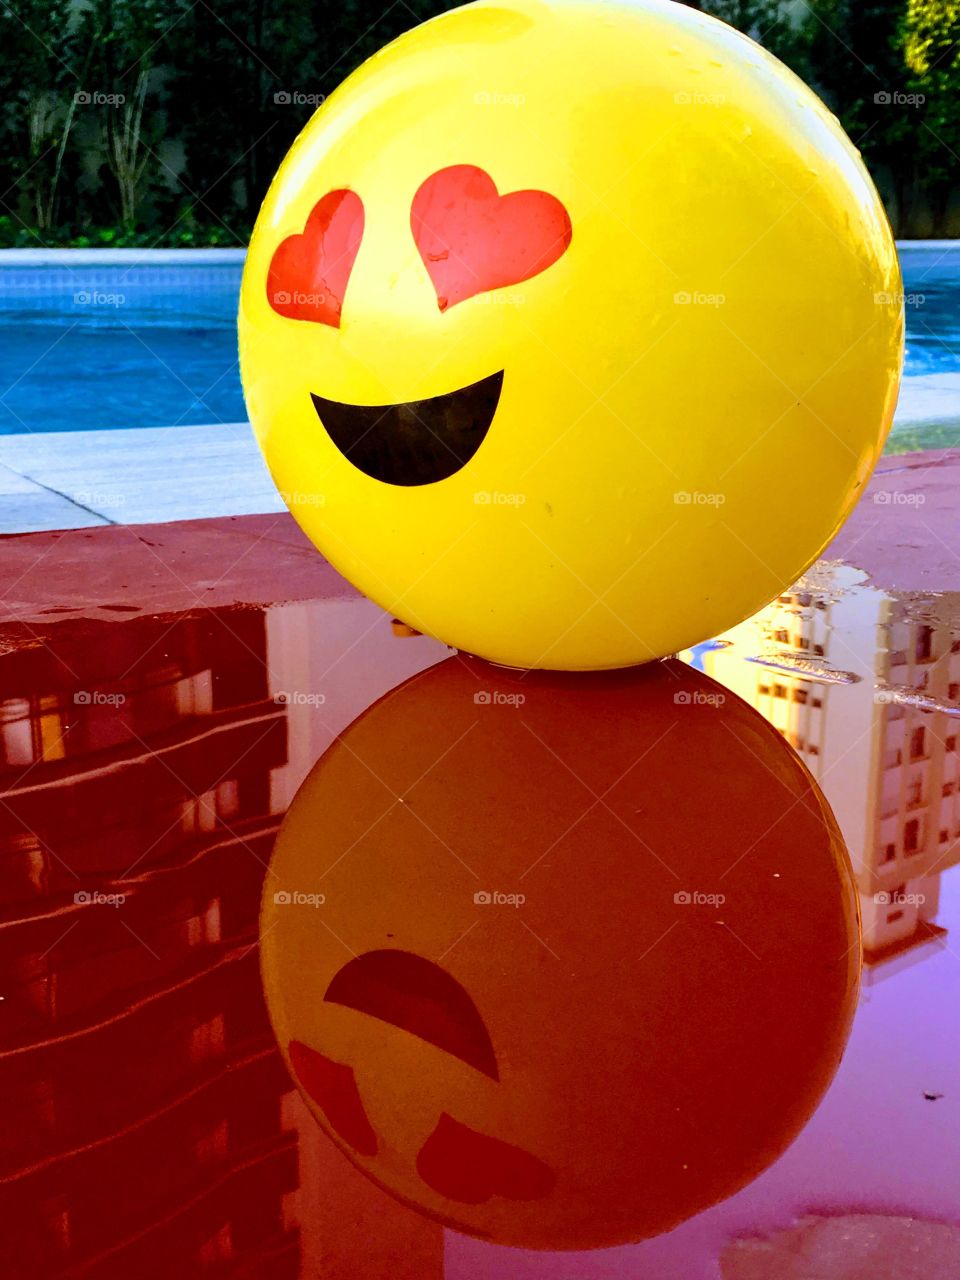 Yellow smile ball reflecting on the red floor